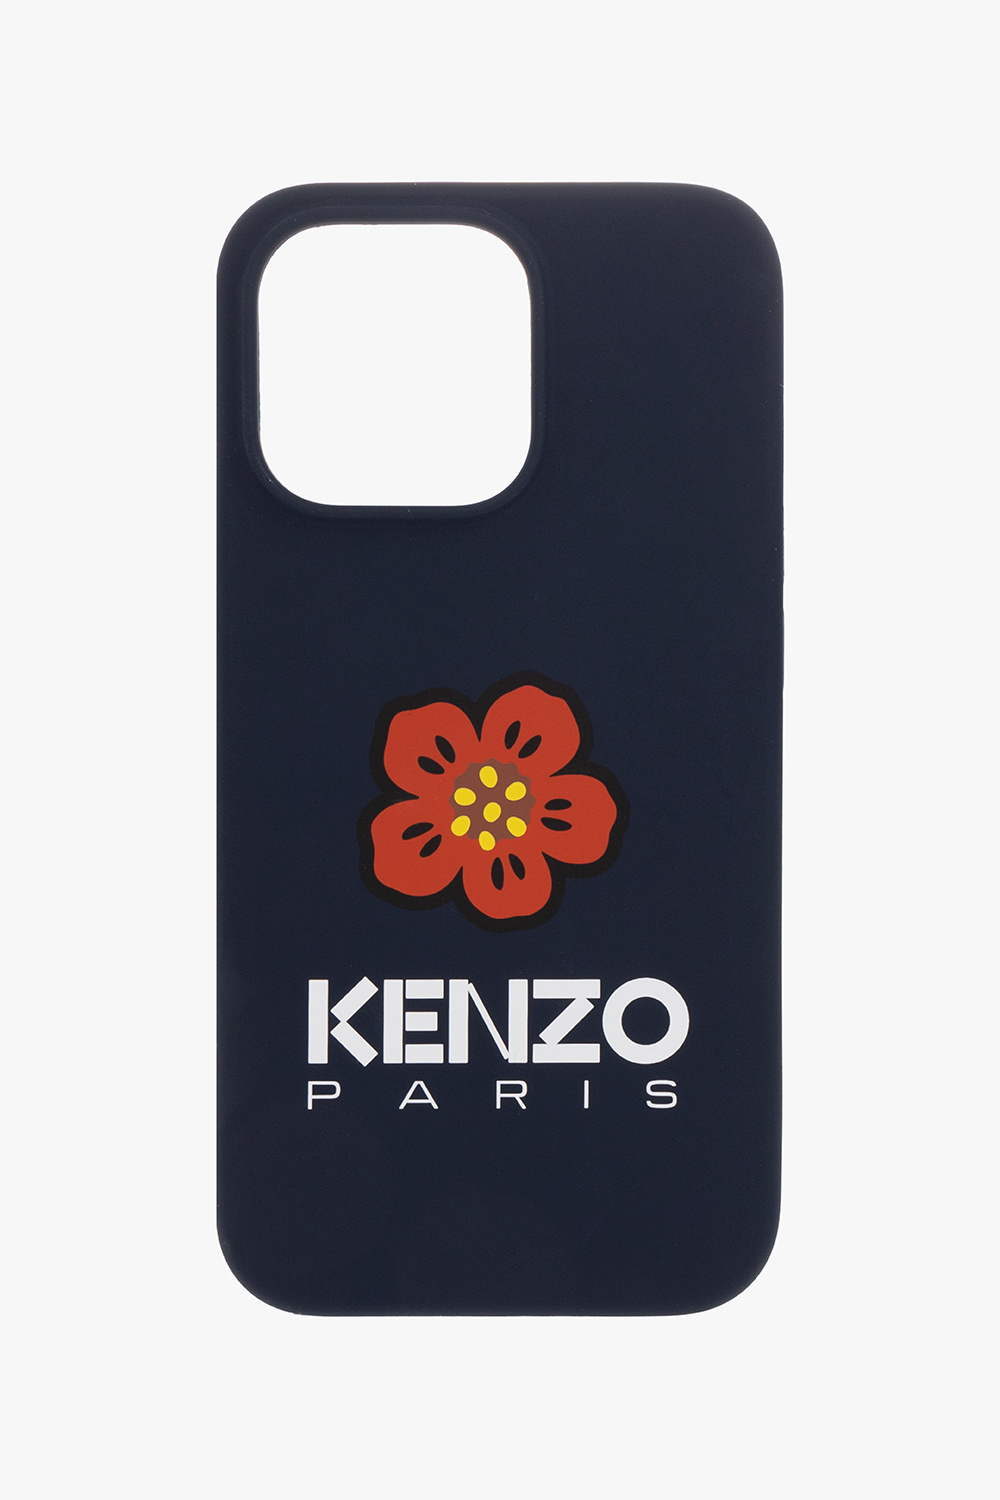 Kenzo Download the latest version of the app